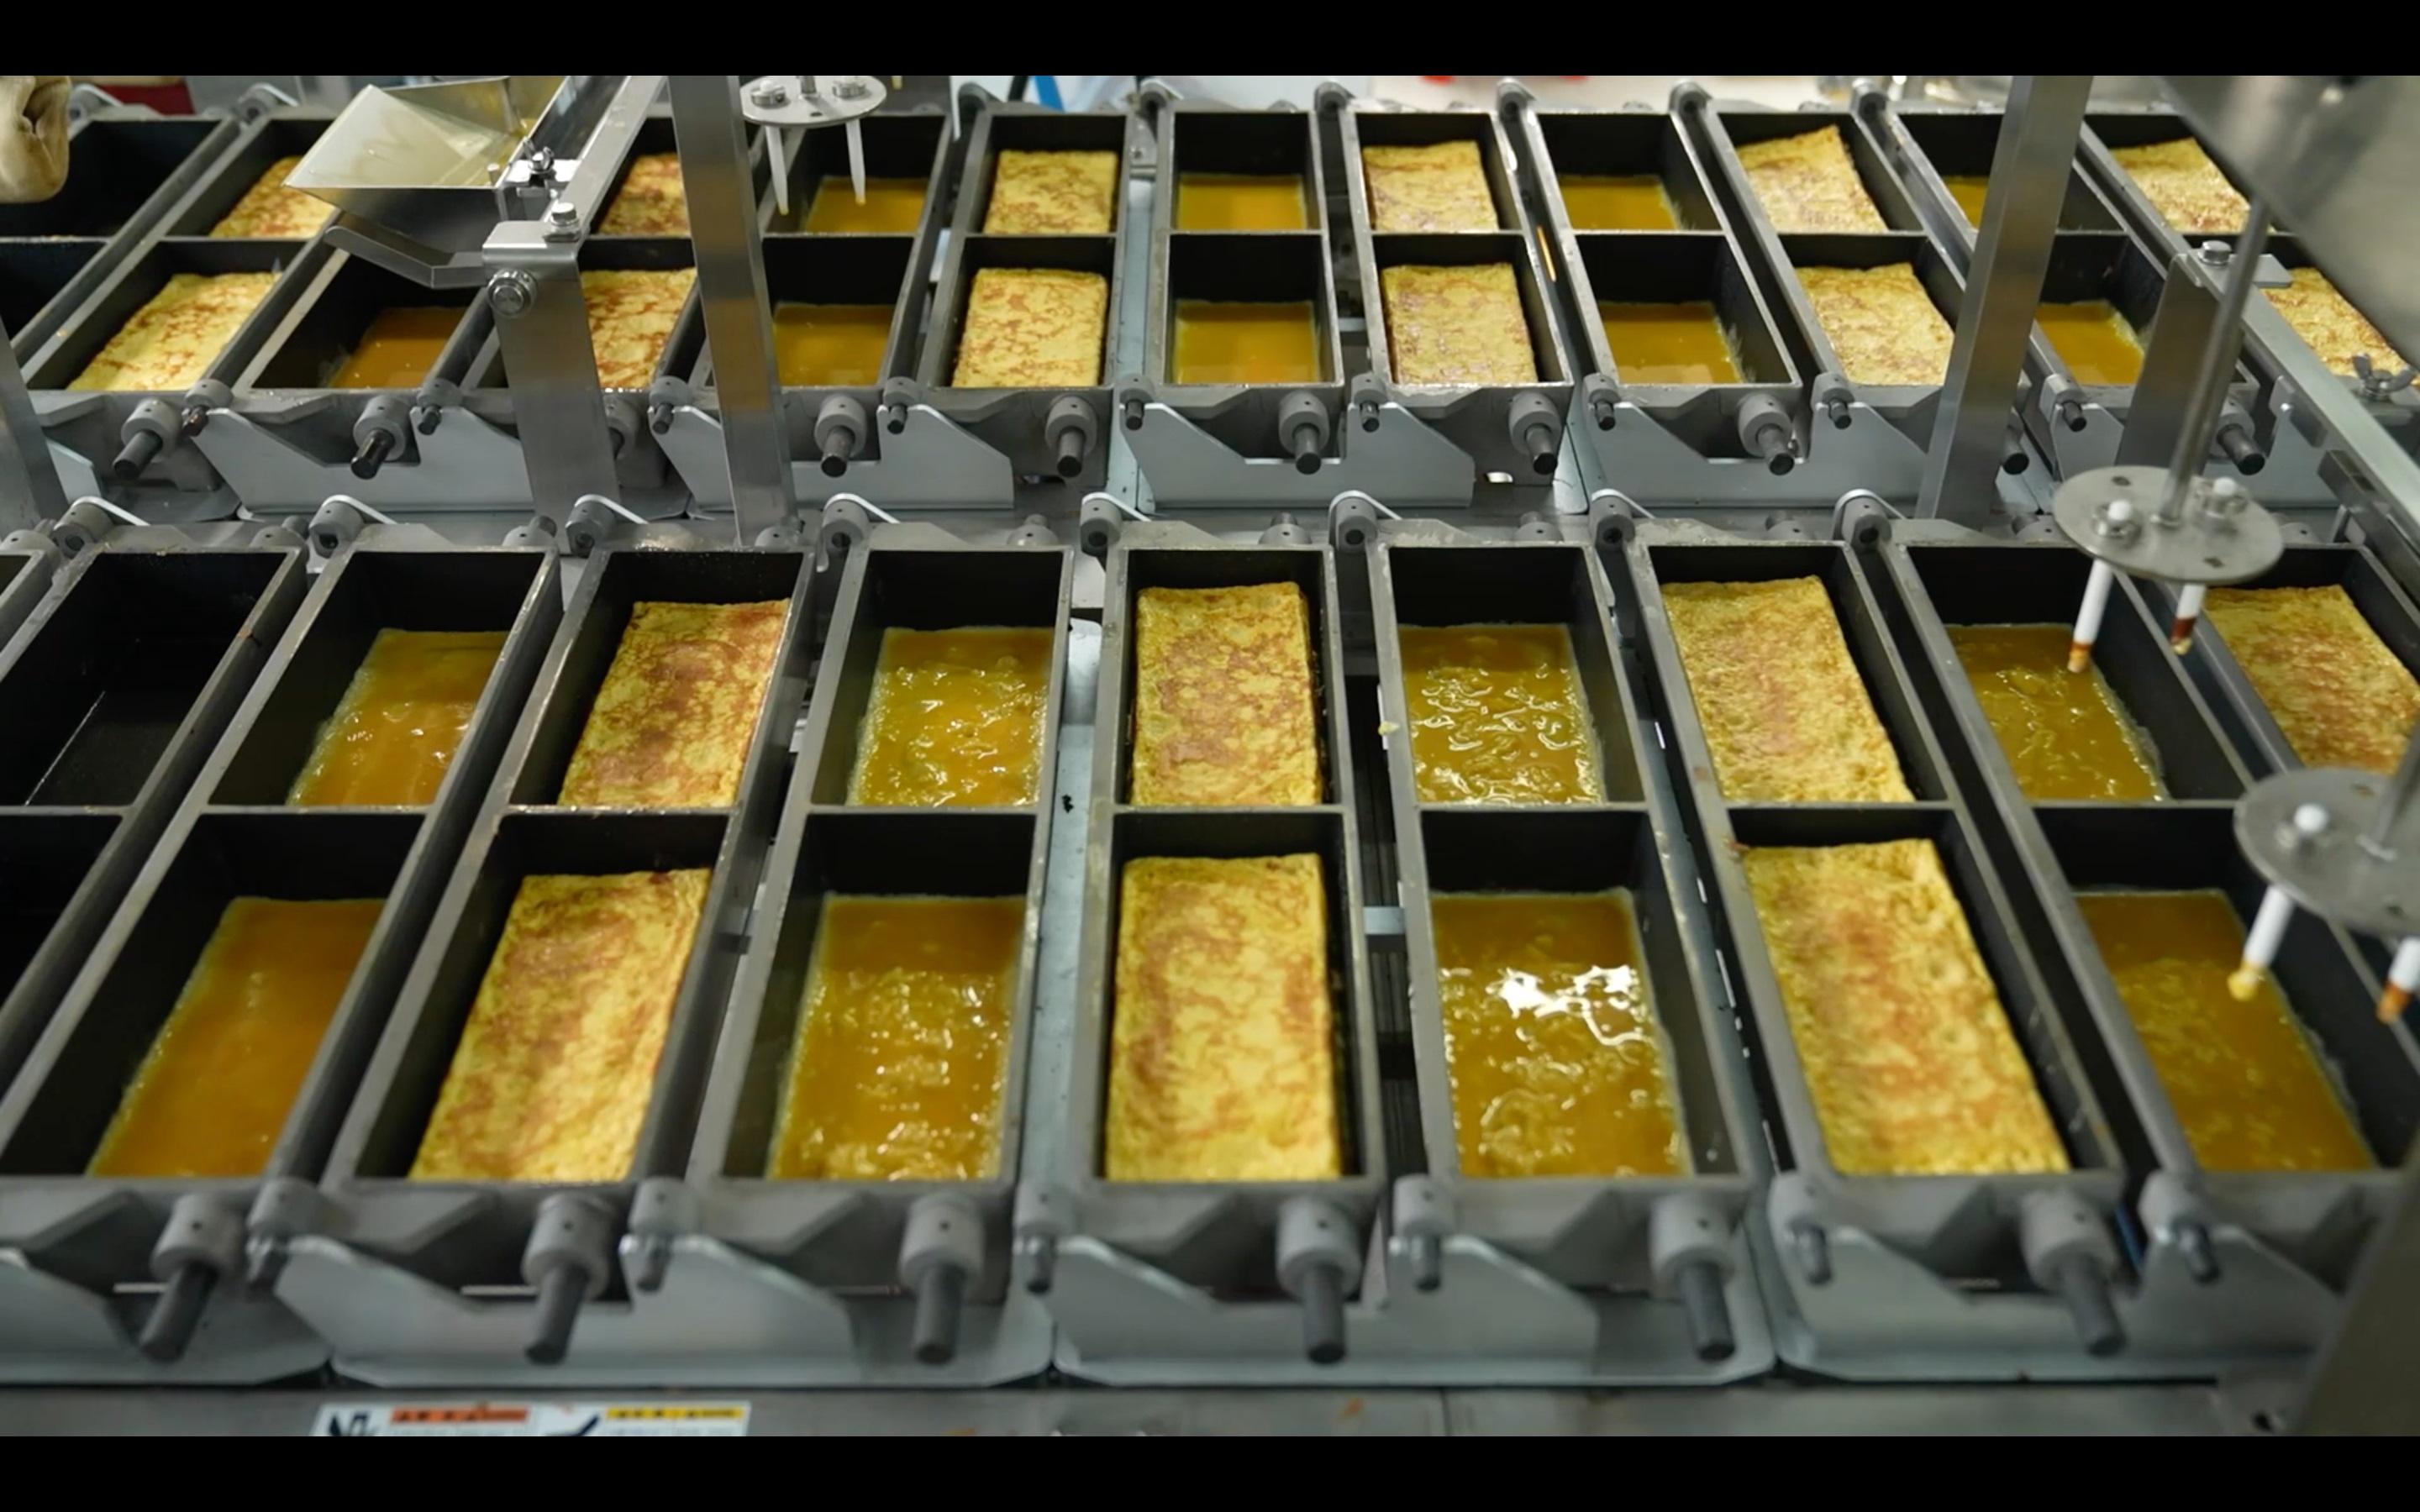 A Japanese agricultural and livestock products exporter, ZEN-NOH International Corporation, opened a food factory in Hong Kong today (March 17) that produces processed egg products to meet the growing demand for egg dishes from local sushi chains and restaurants. Photo shows the food factory in Kwai Chung producing grilled eggs.